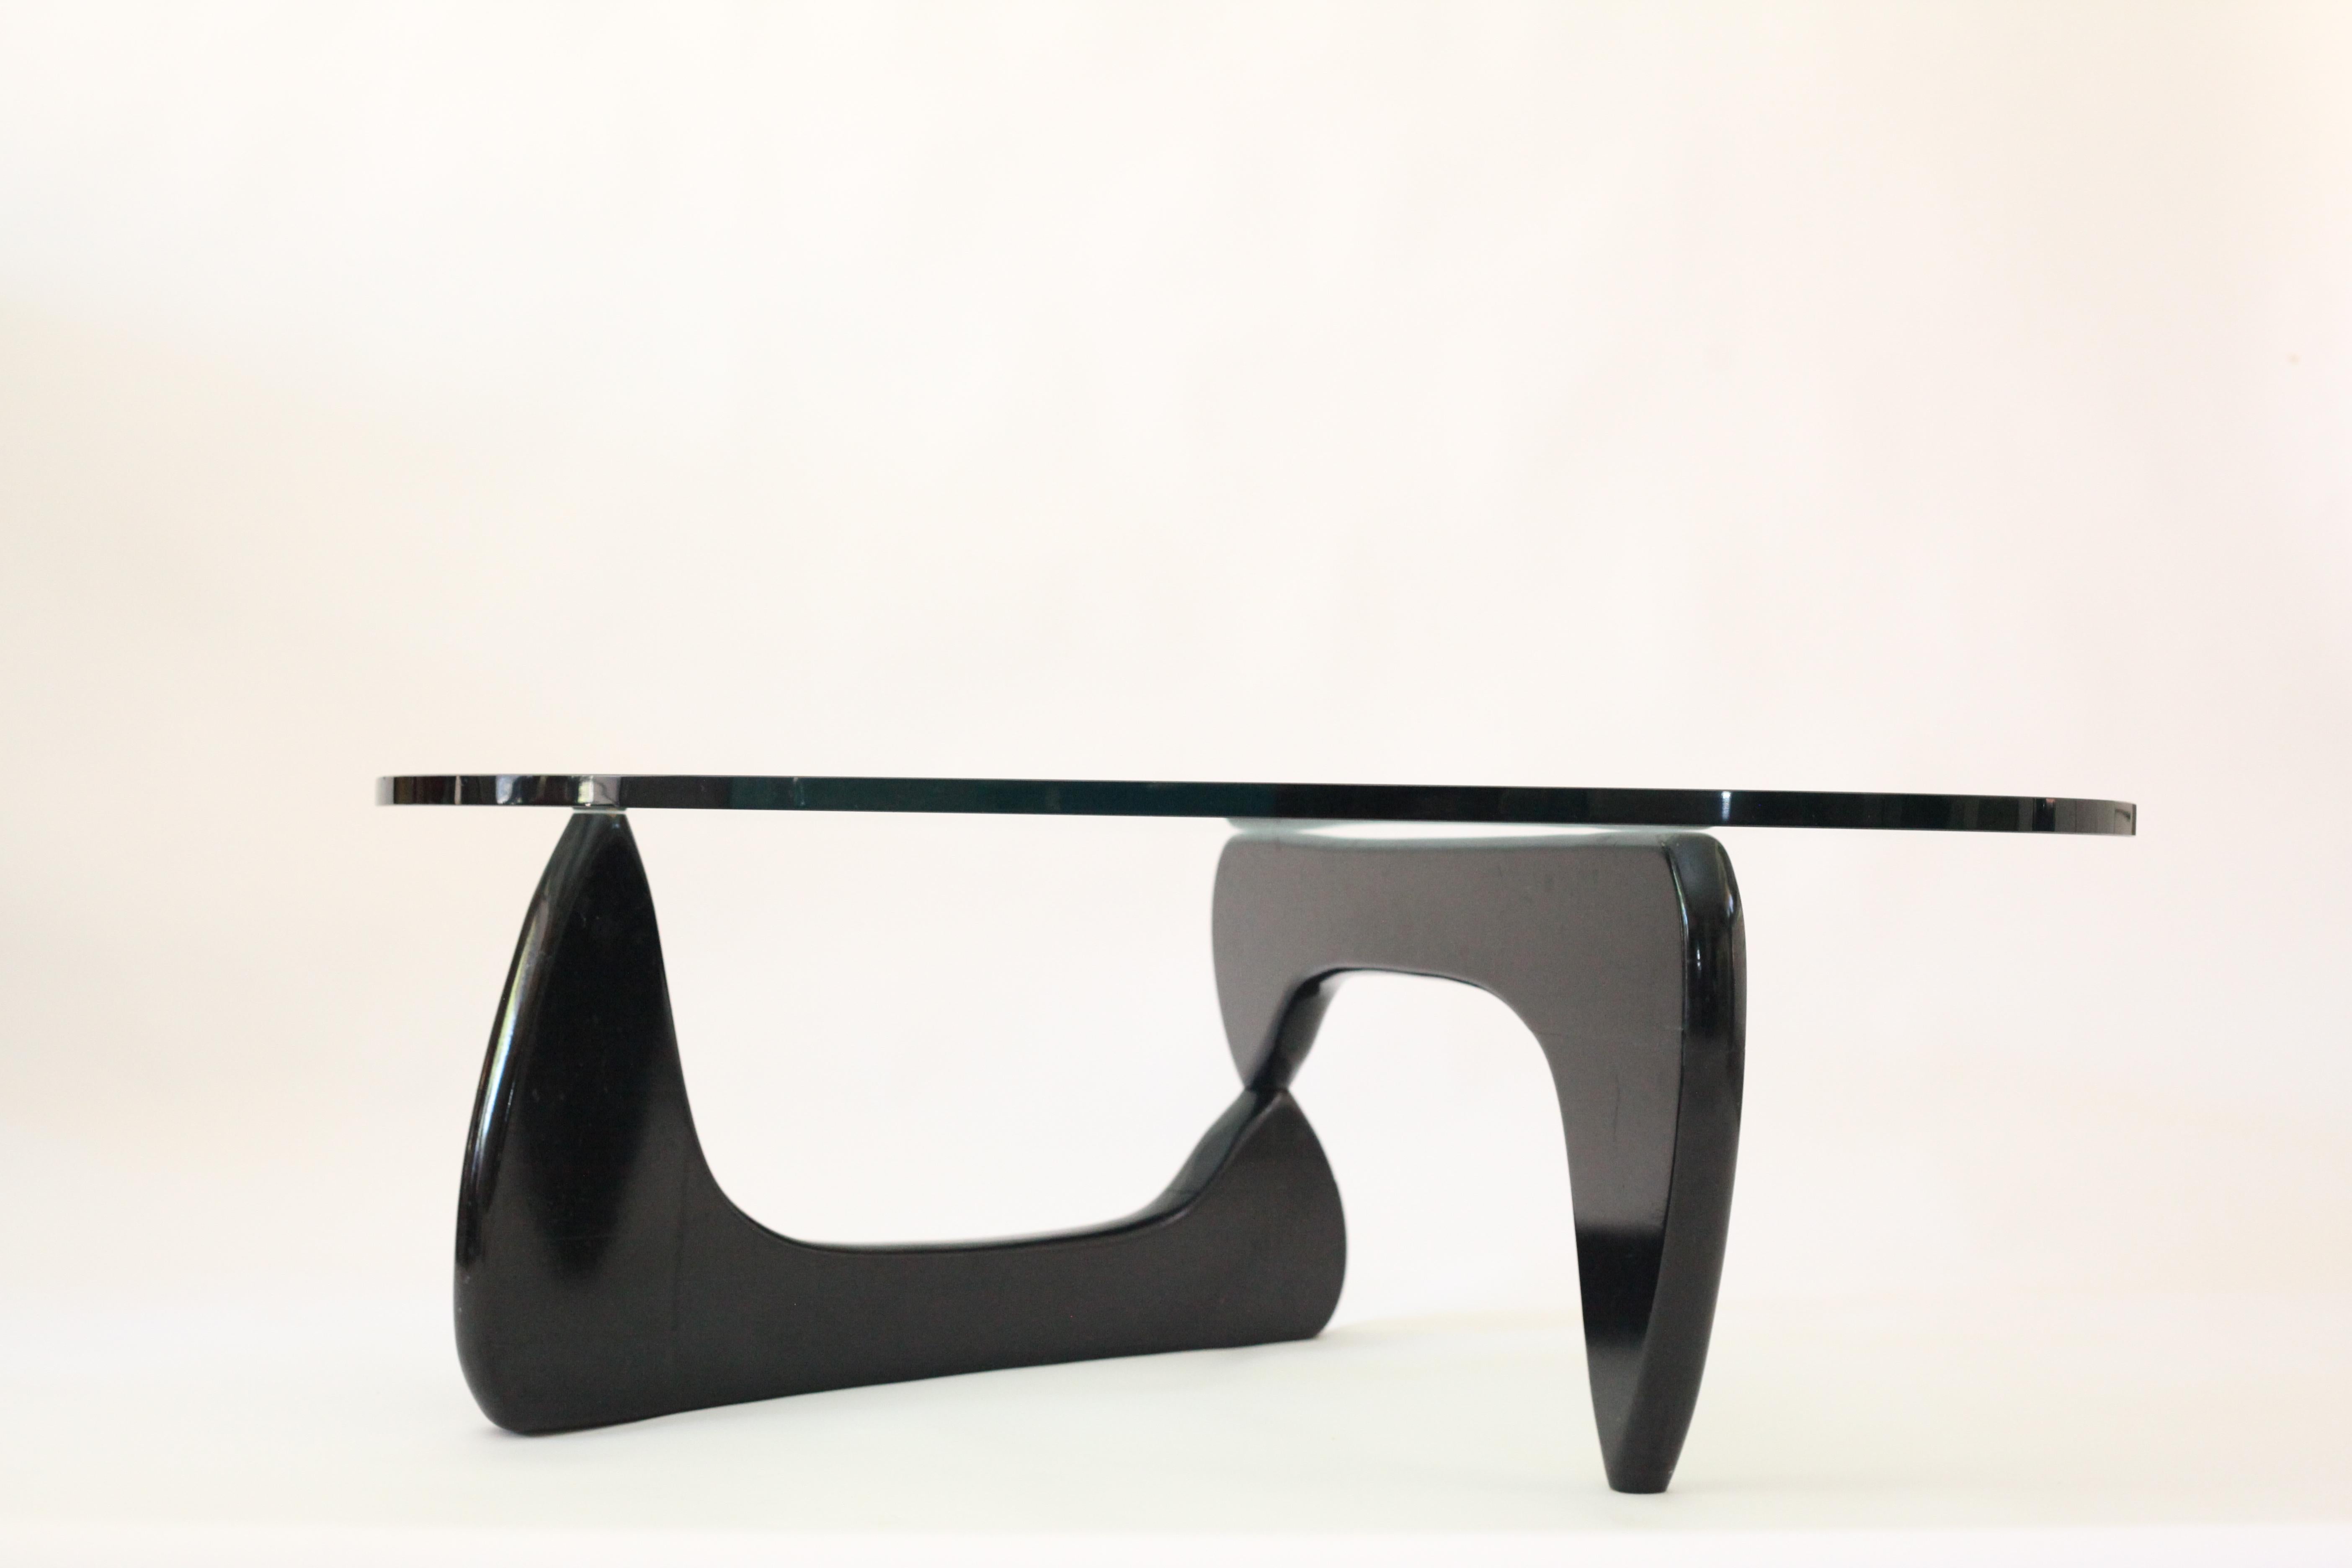 Authentic, documented 1959 Isamu Noguchi IN 50 ebonized black coffee table for Herman Miller. Glass is in great condition and a copy of the original receipt is available. A collectors piece.